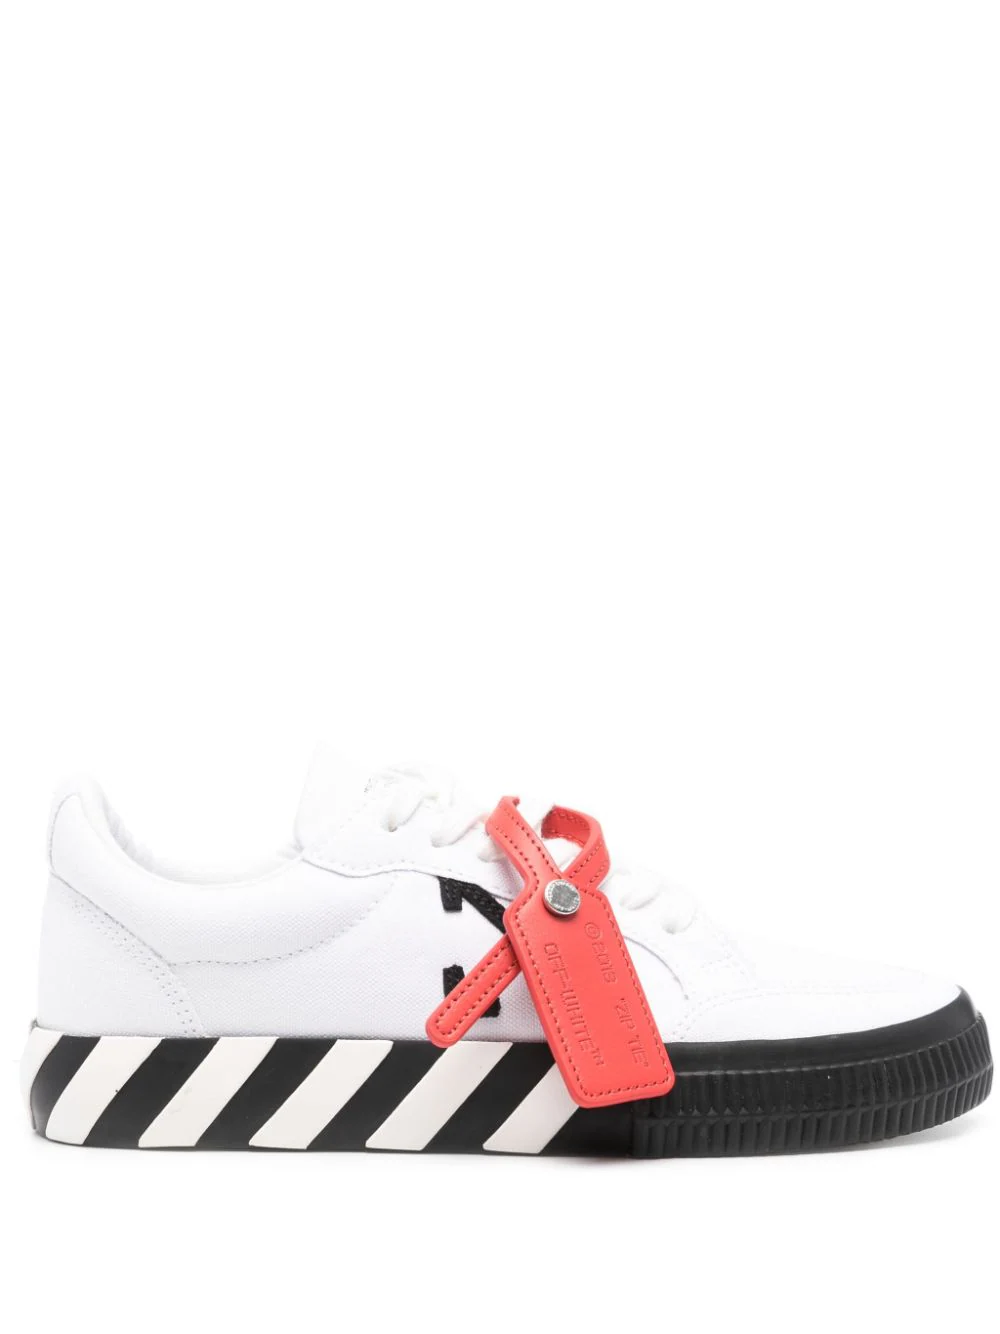 Off-White Black Leather Meteor Flat Slides Size 39 Off-White